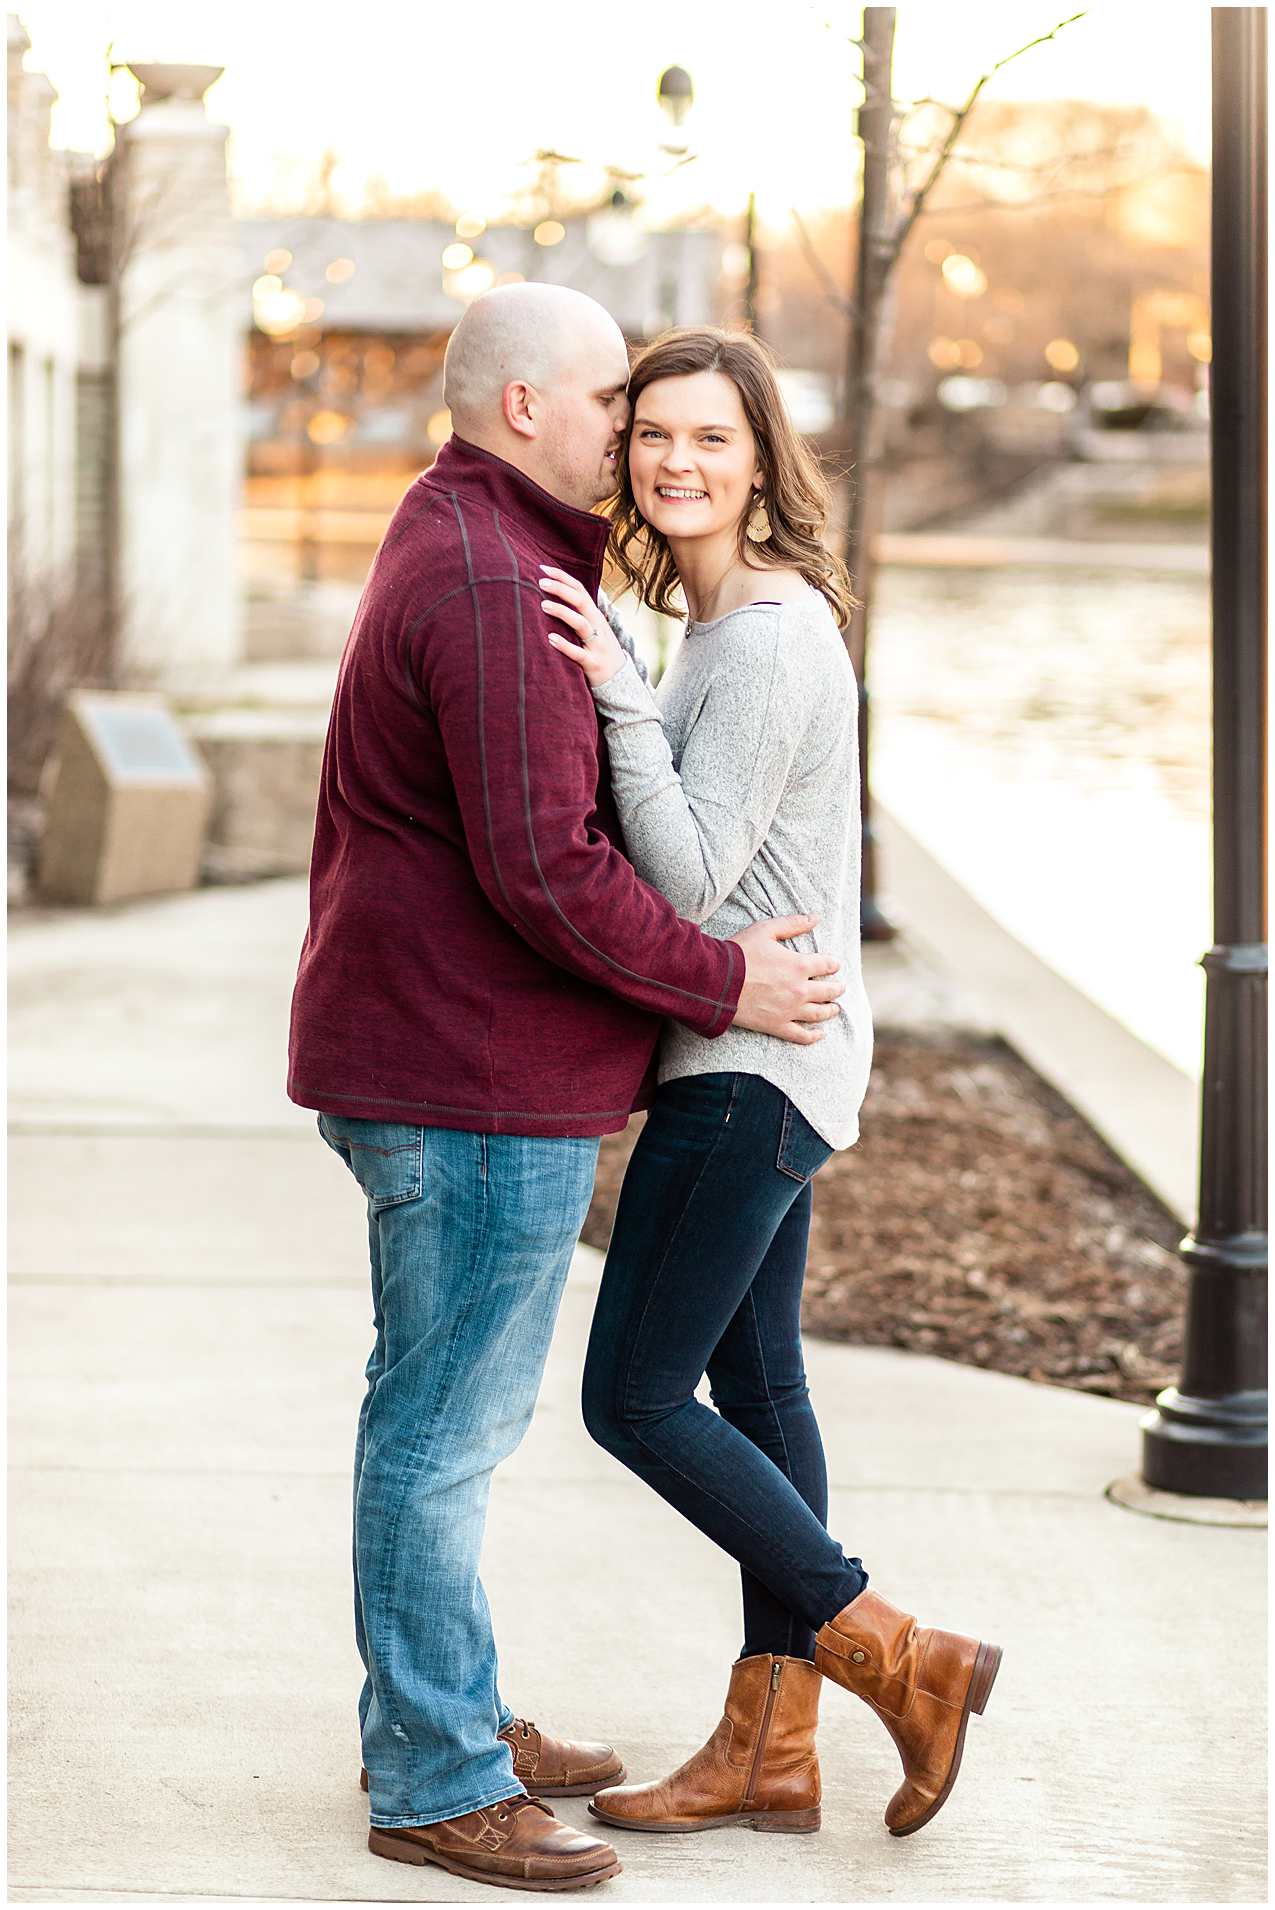 Naperville IL Sunset Engagement Photos-Spring Engaged Couple in the Chicago Suburbs